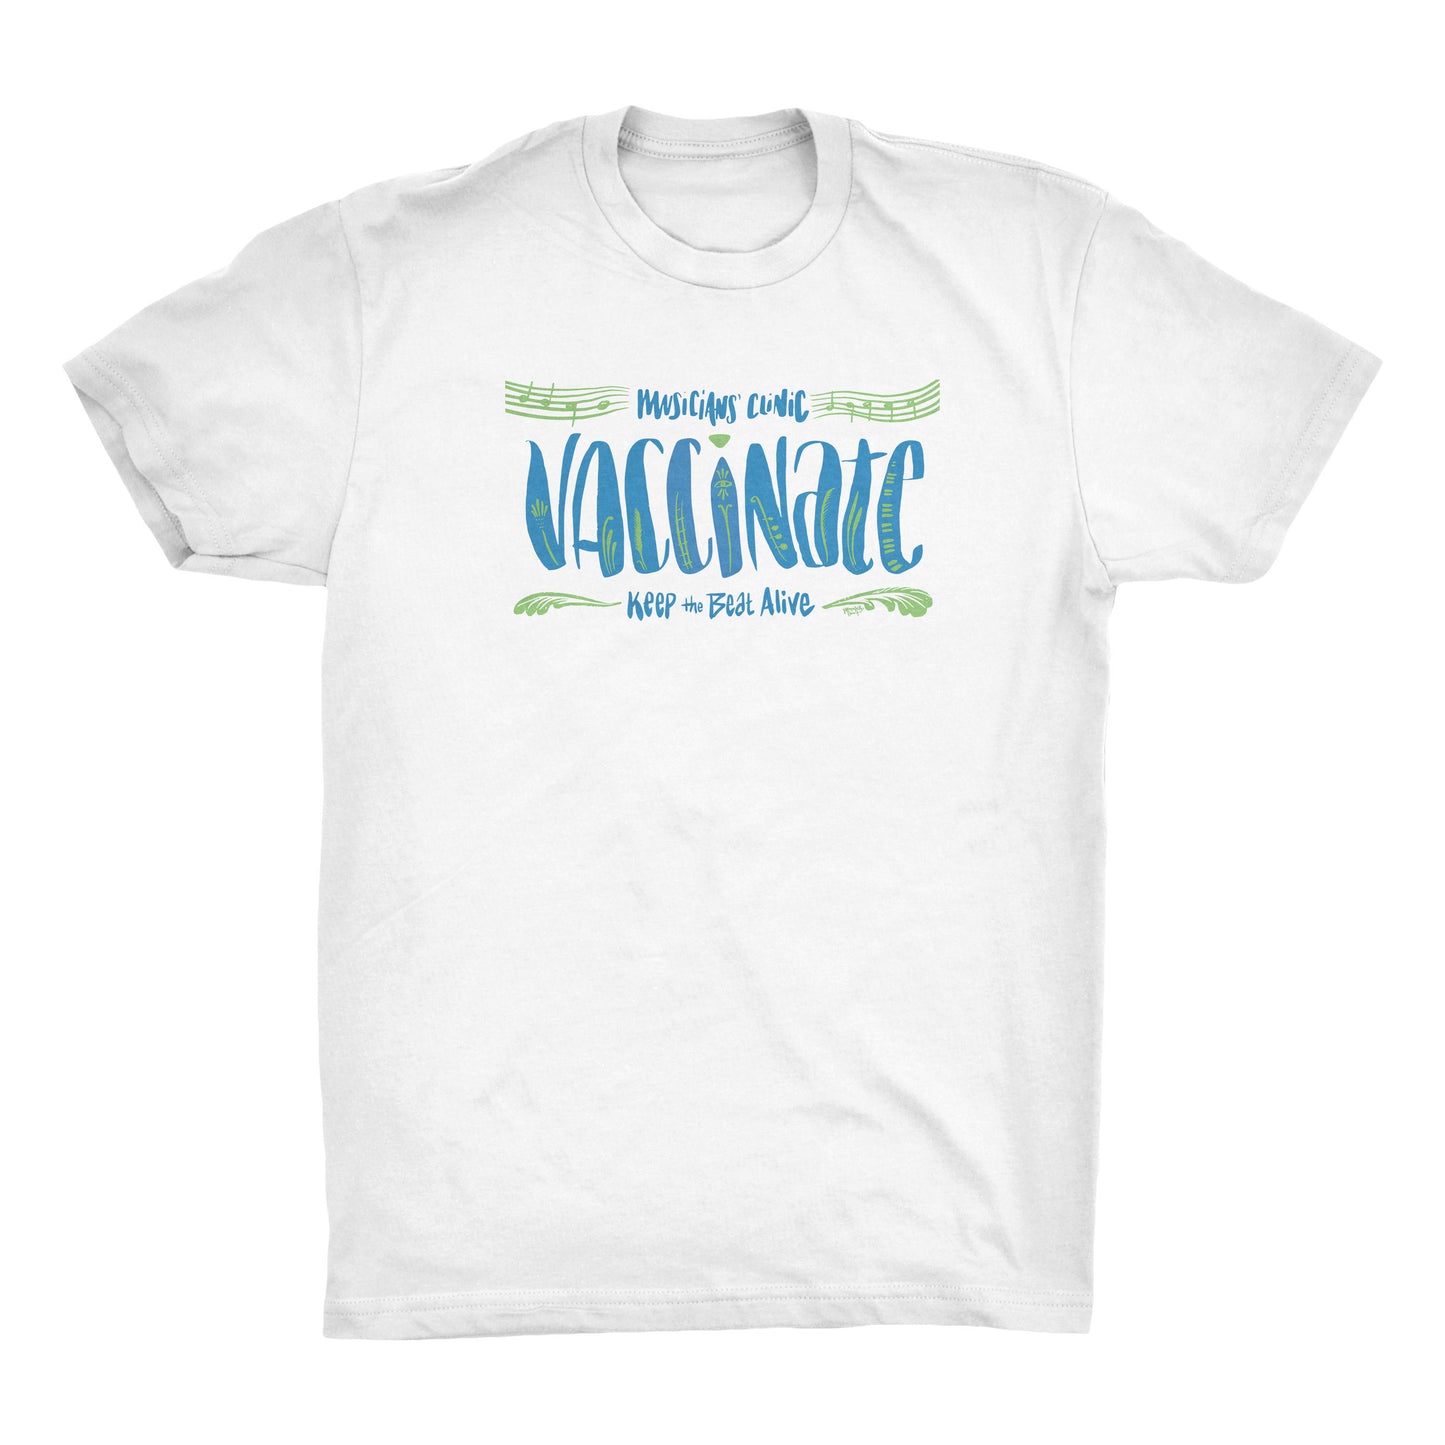 VACCINATE T-Shirt in White